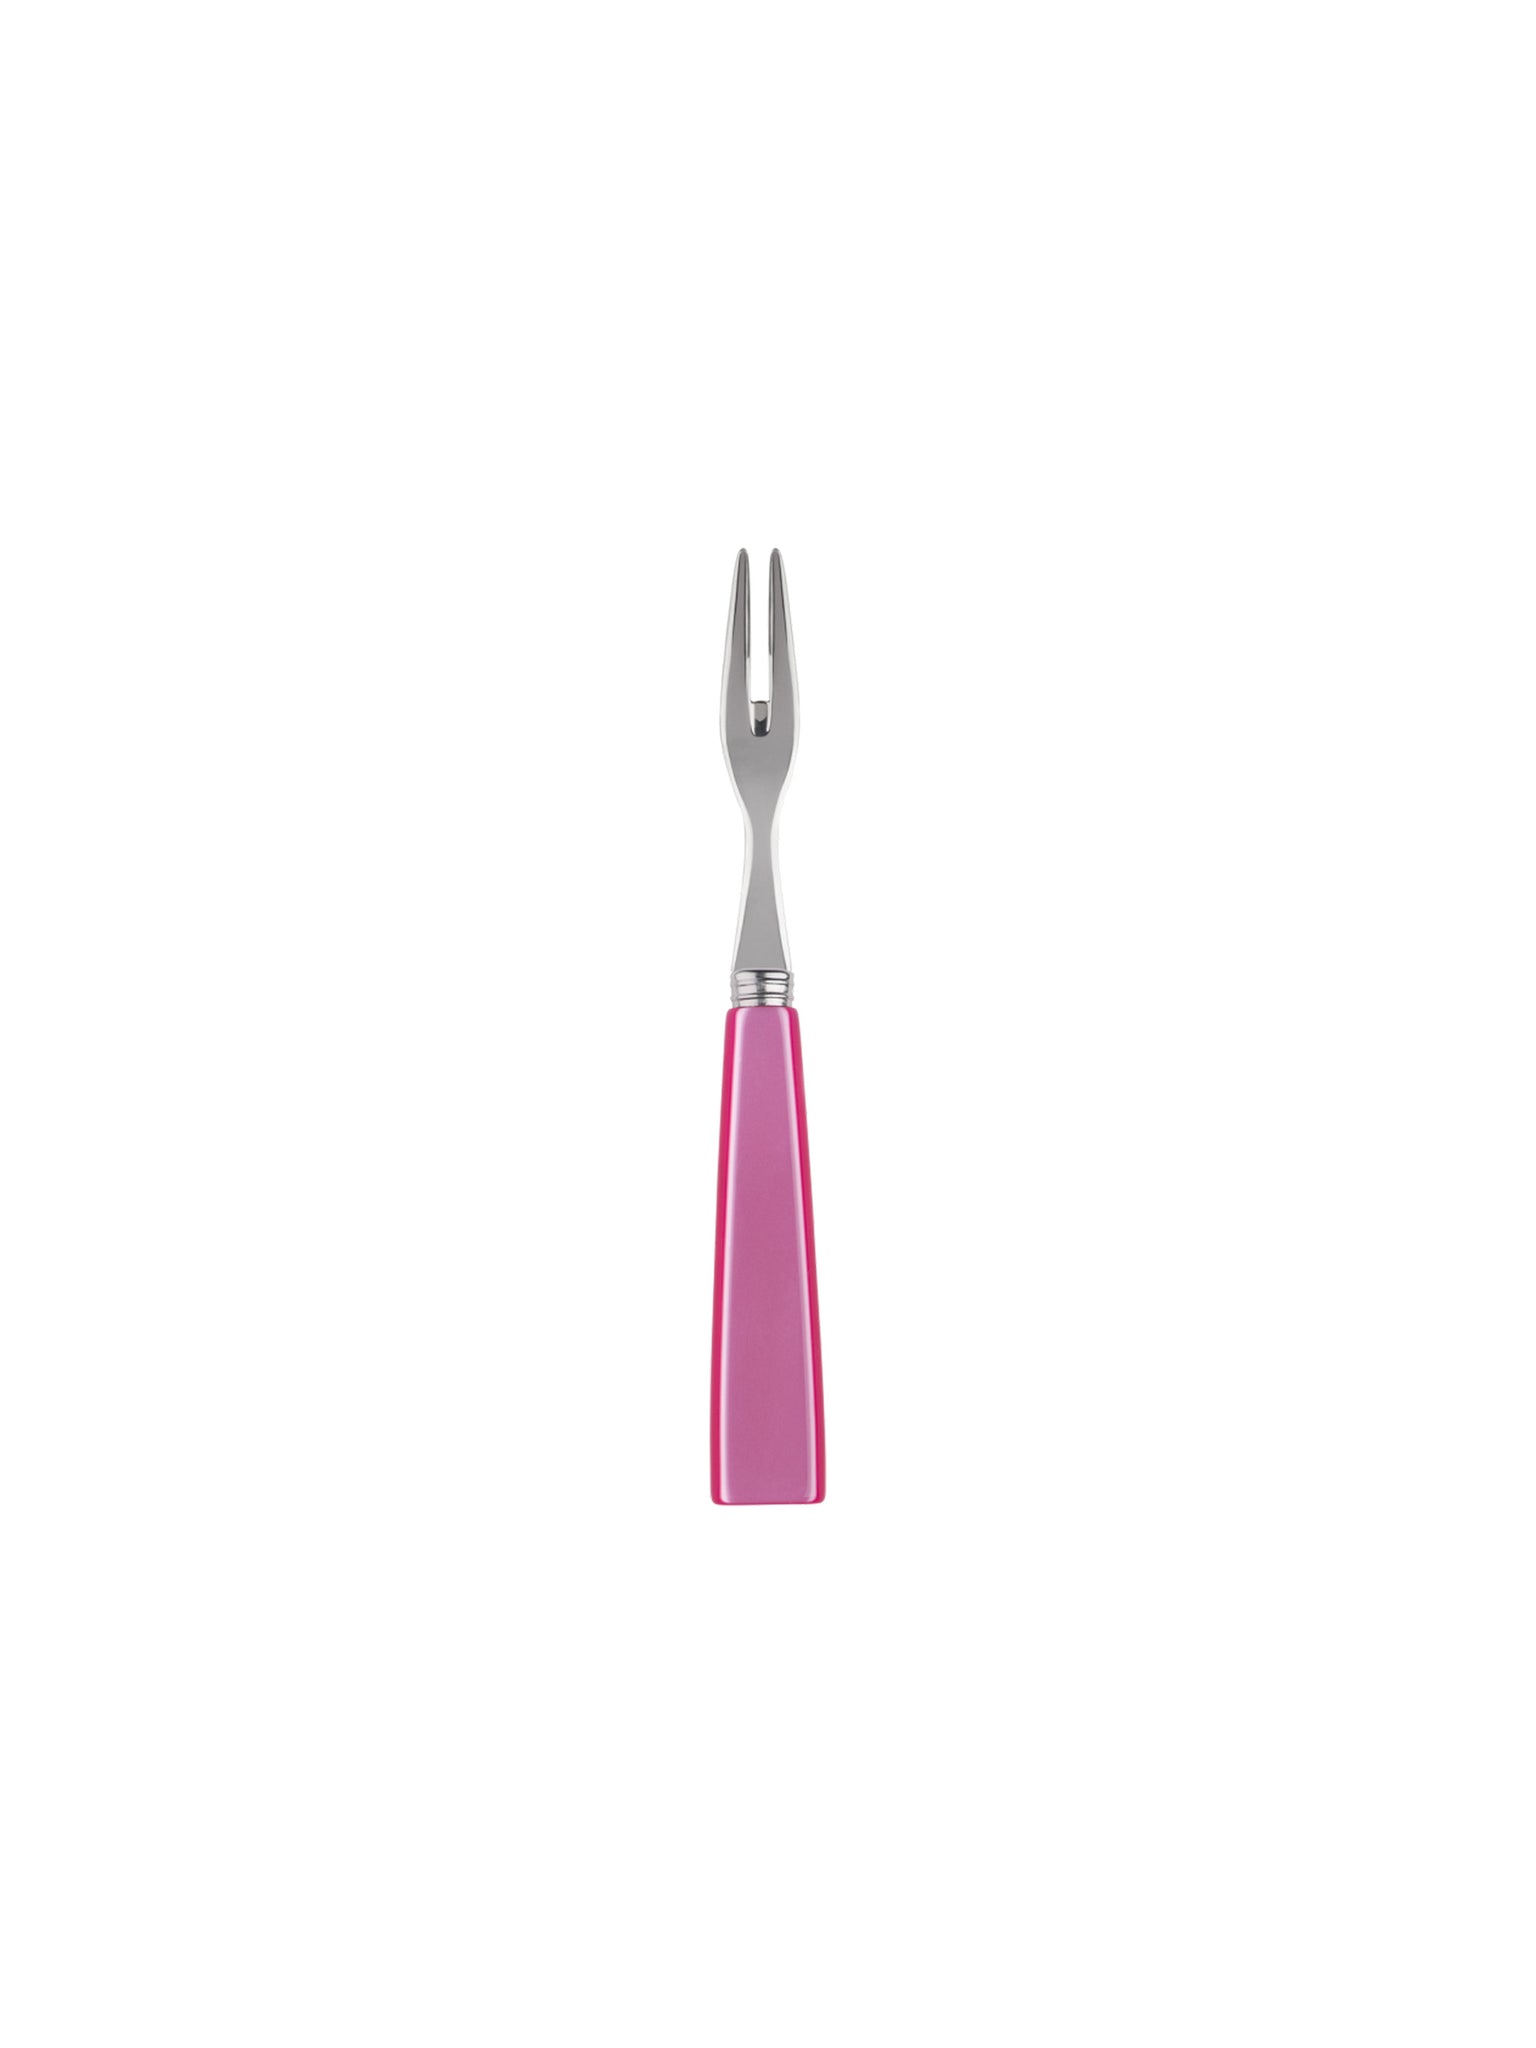 Sabre Paris Icone Pink Candy Cocktail Forks Weston Table